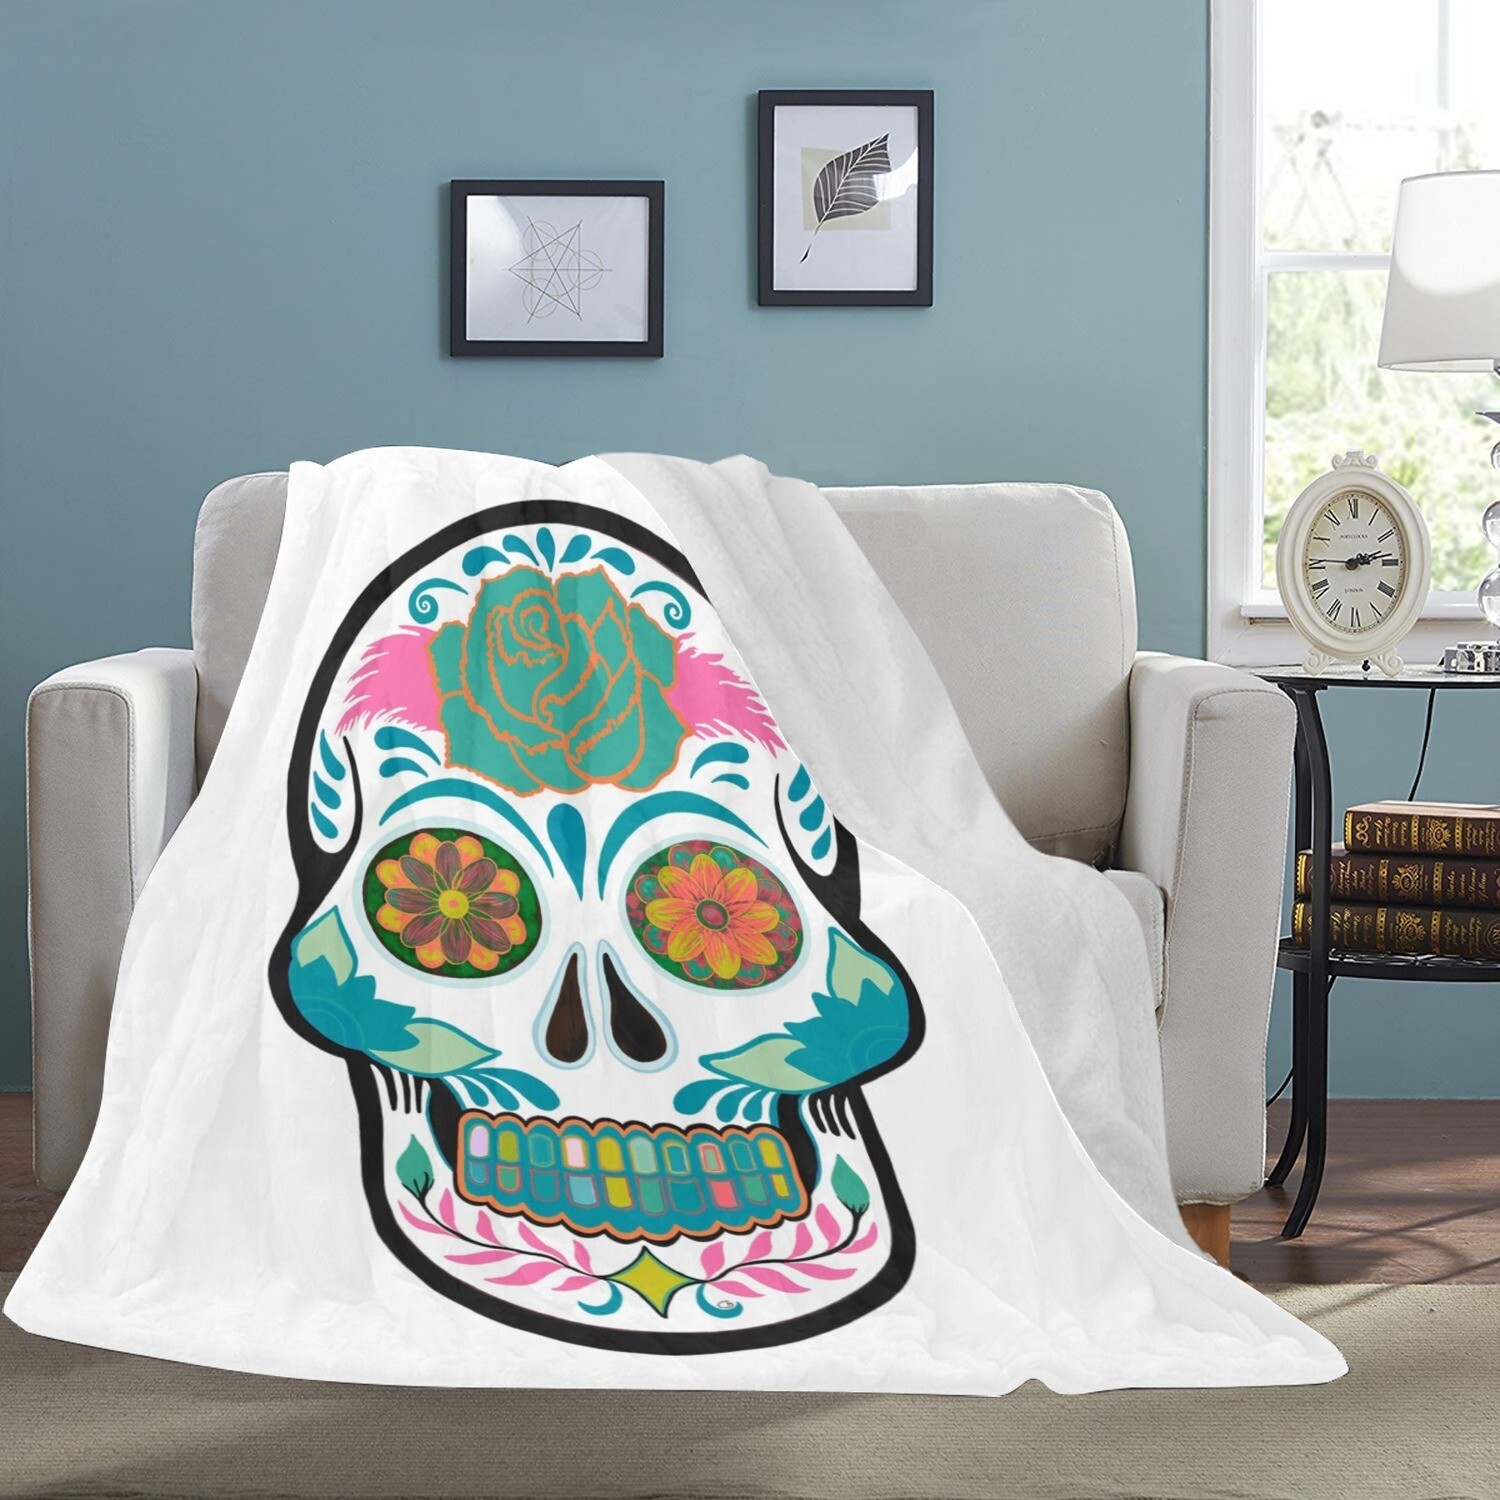 🤴🏽👸🏽💀Large Ultra-Soft Micro Fleece Blanket Skulls Series Day of the dead #22 by Maru, gift, gift for her, gift for him, gift for them, 70"x80", 32 colors on white